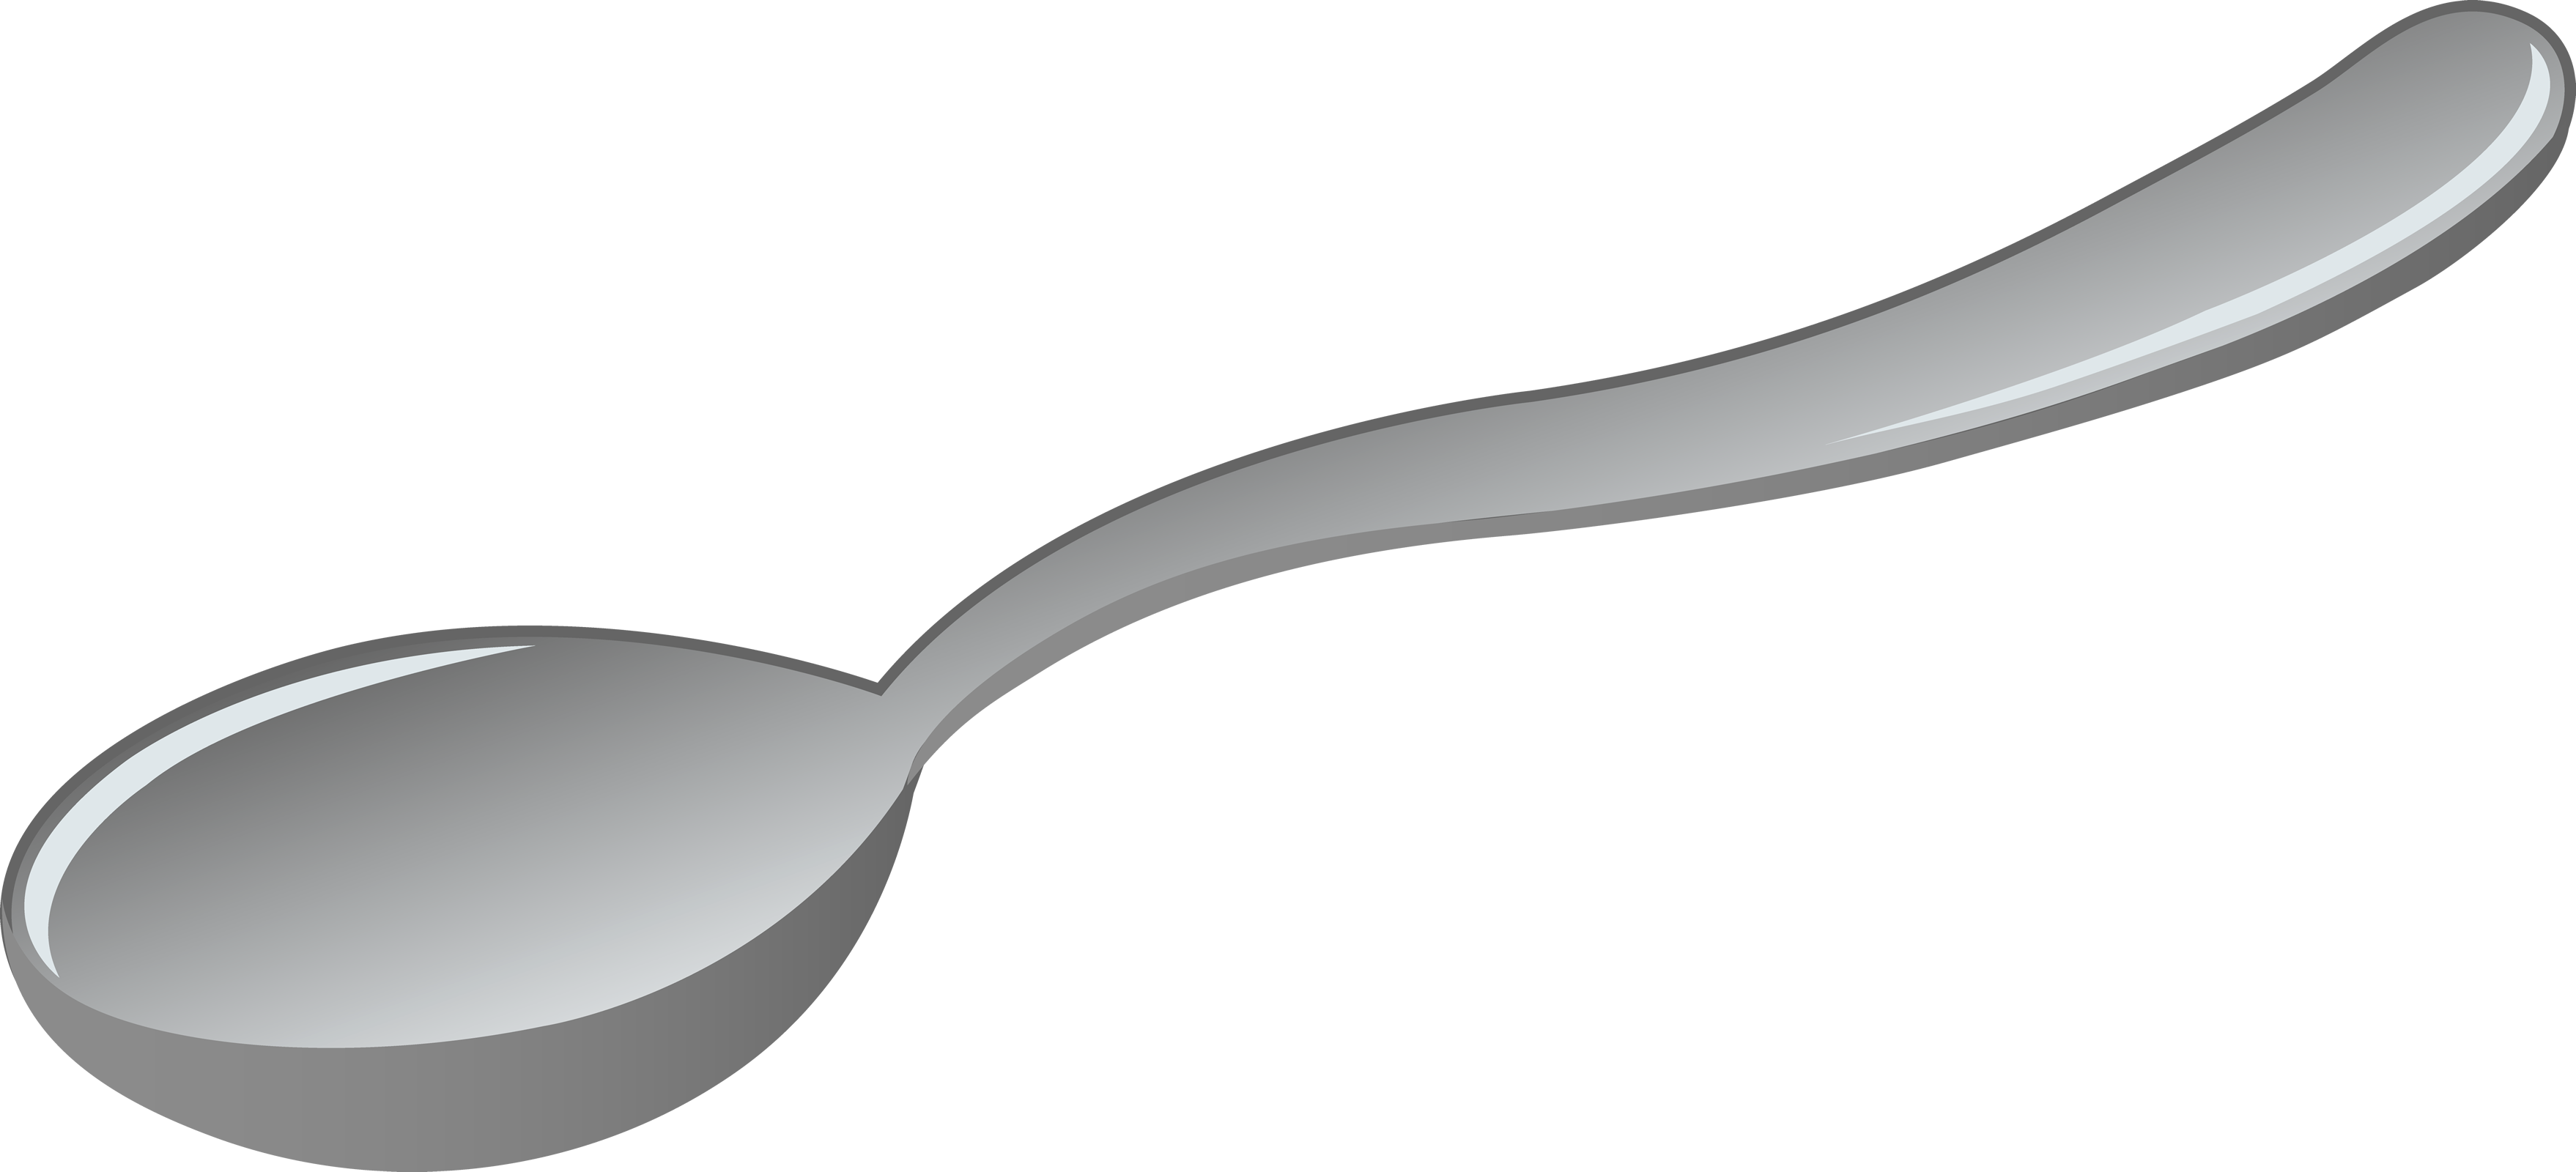 Spoon Png Image - Spoon Clipart Transparent Png (3516x1600), Png Download